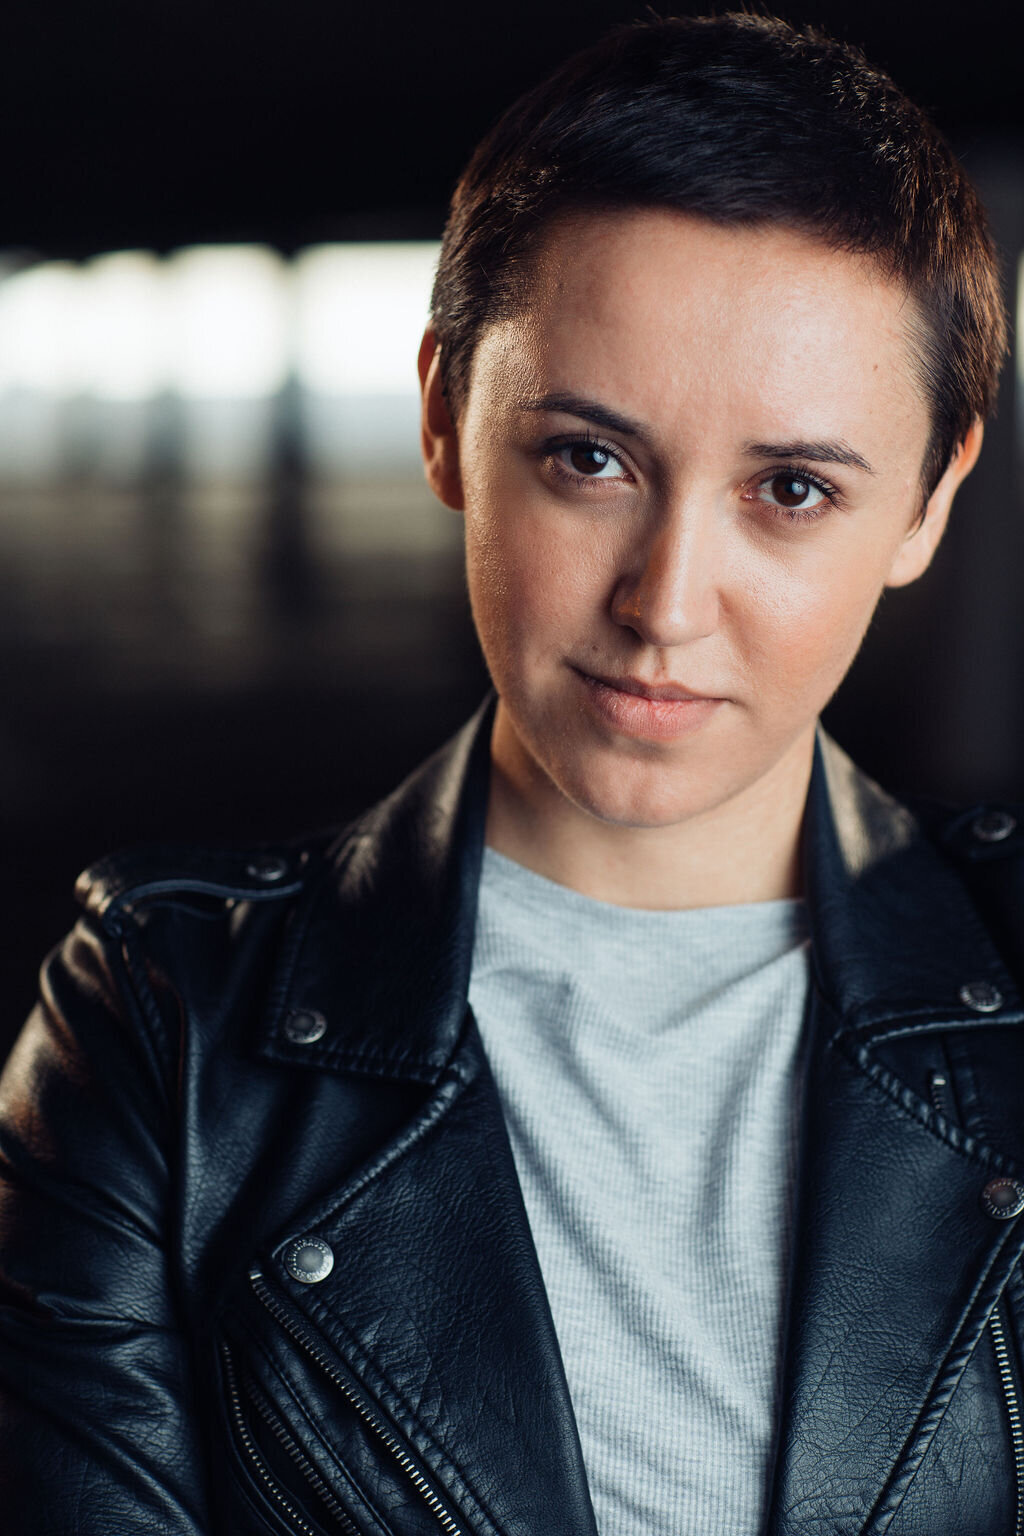 Headshot Photograph Of Young Woman In Outer Black Leather Jacket And Inner Gray Shirt Los Angeles